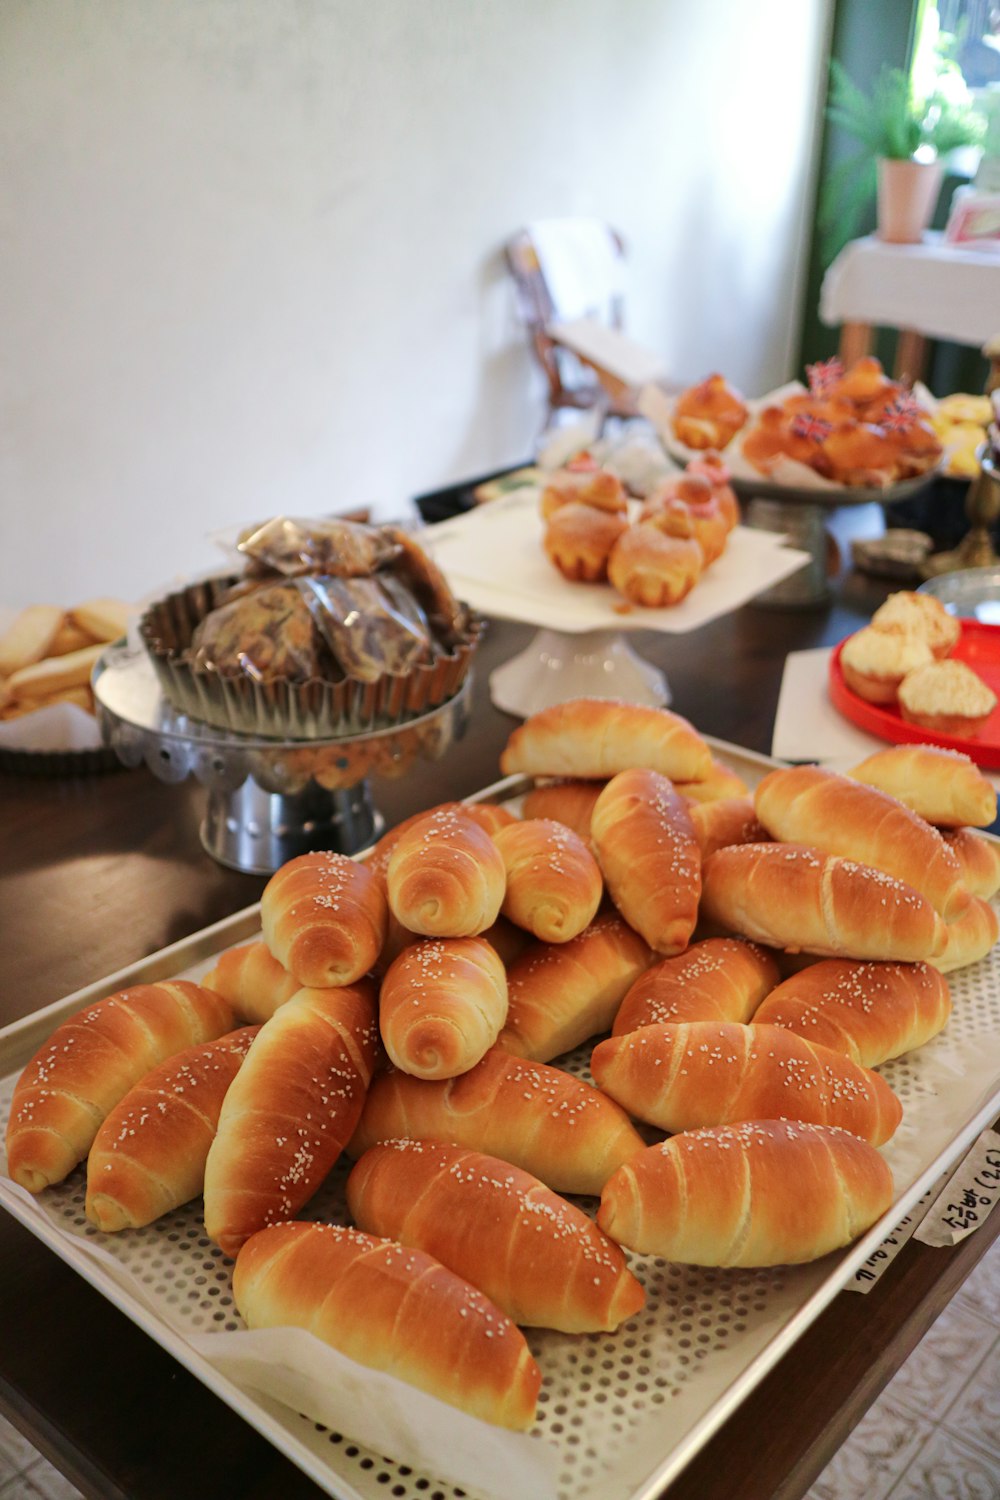 a table full of breads and pastries on it